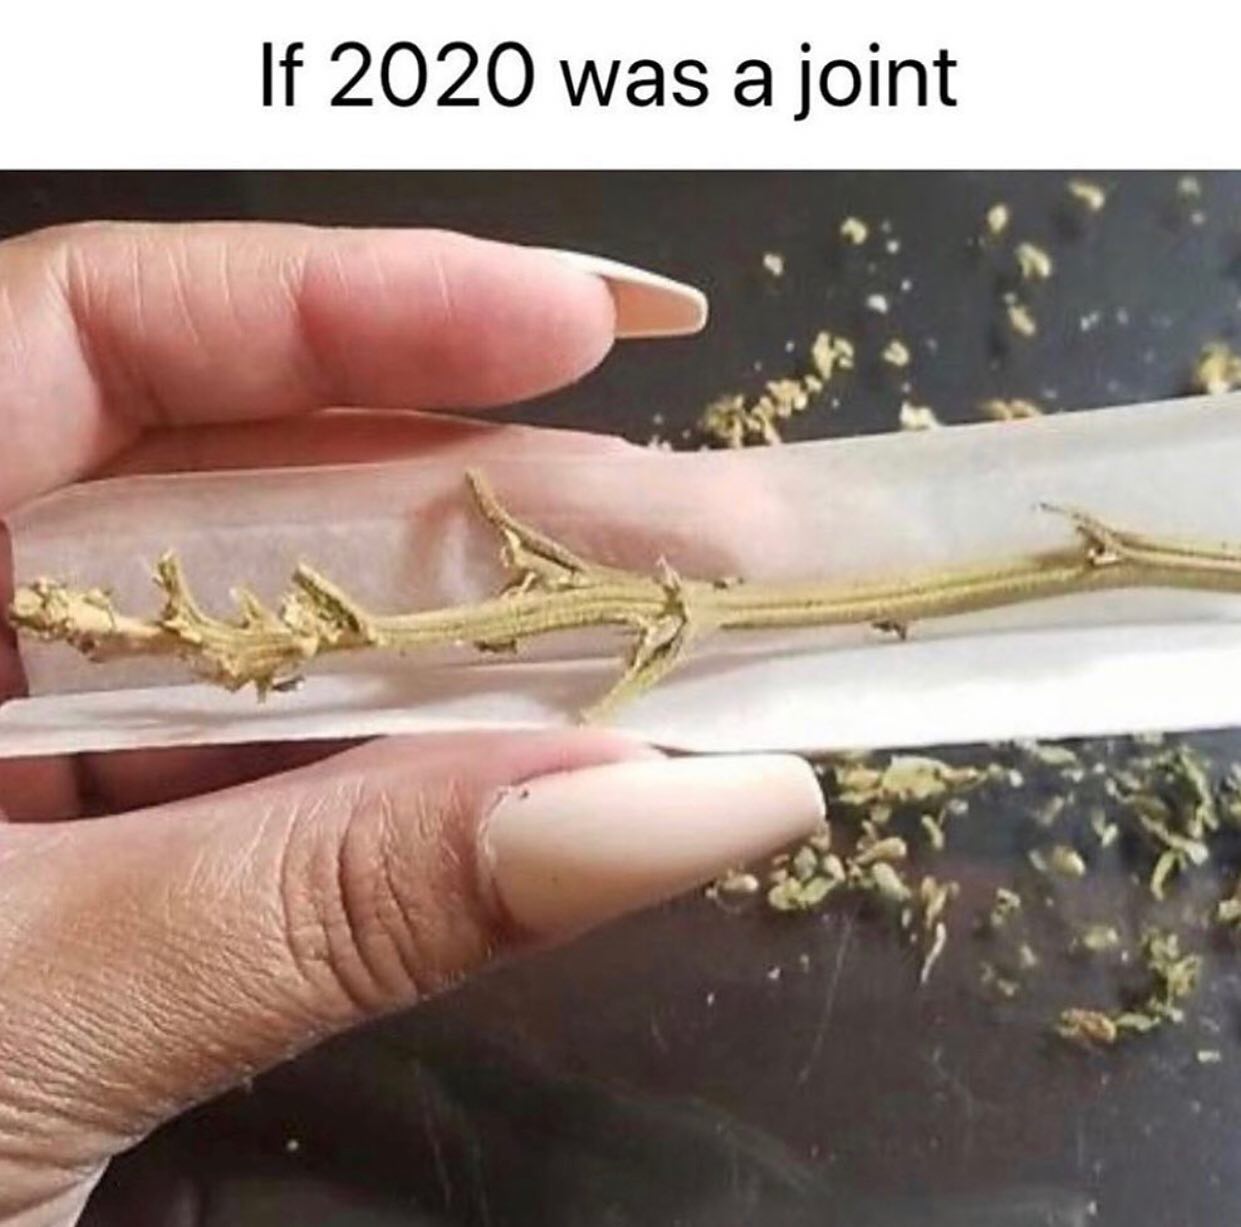 dank memes - if 2020 was a meme - If 2020 was a joint